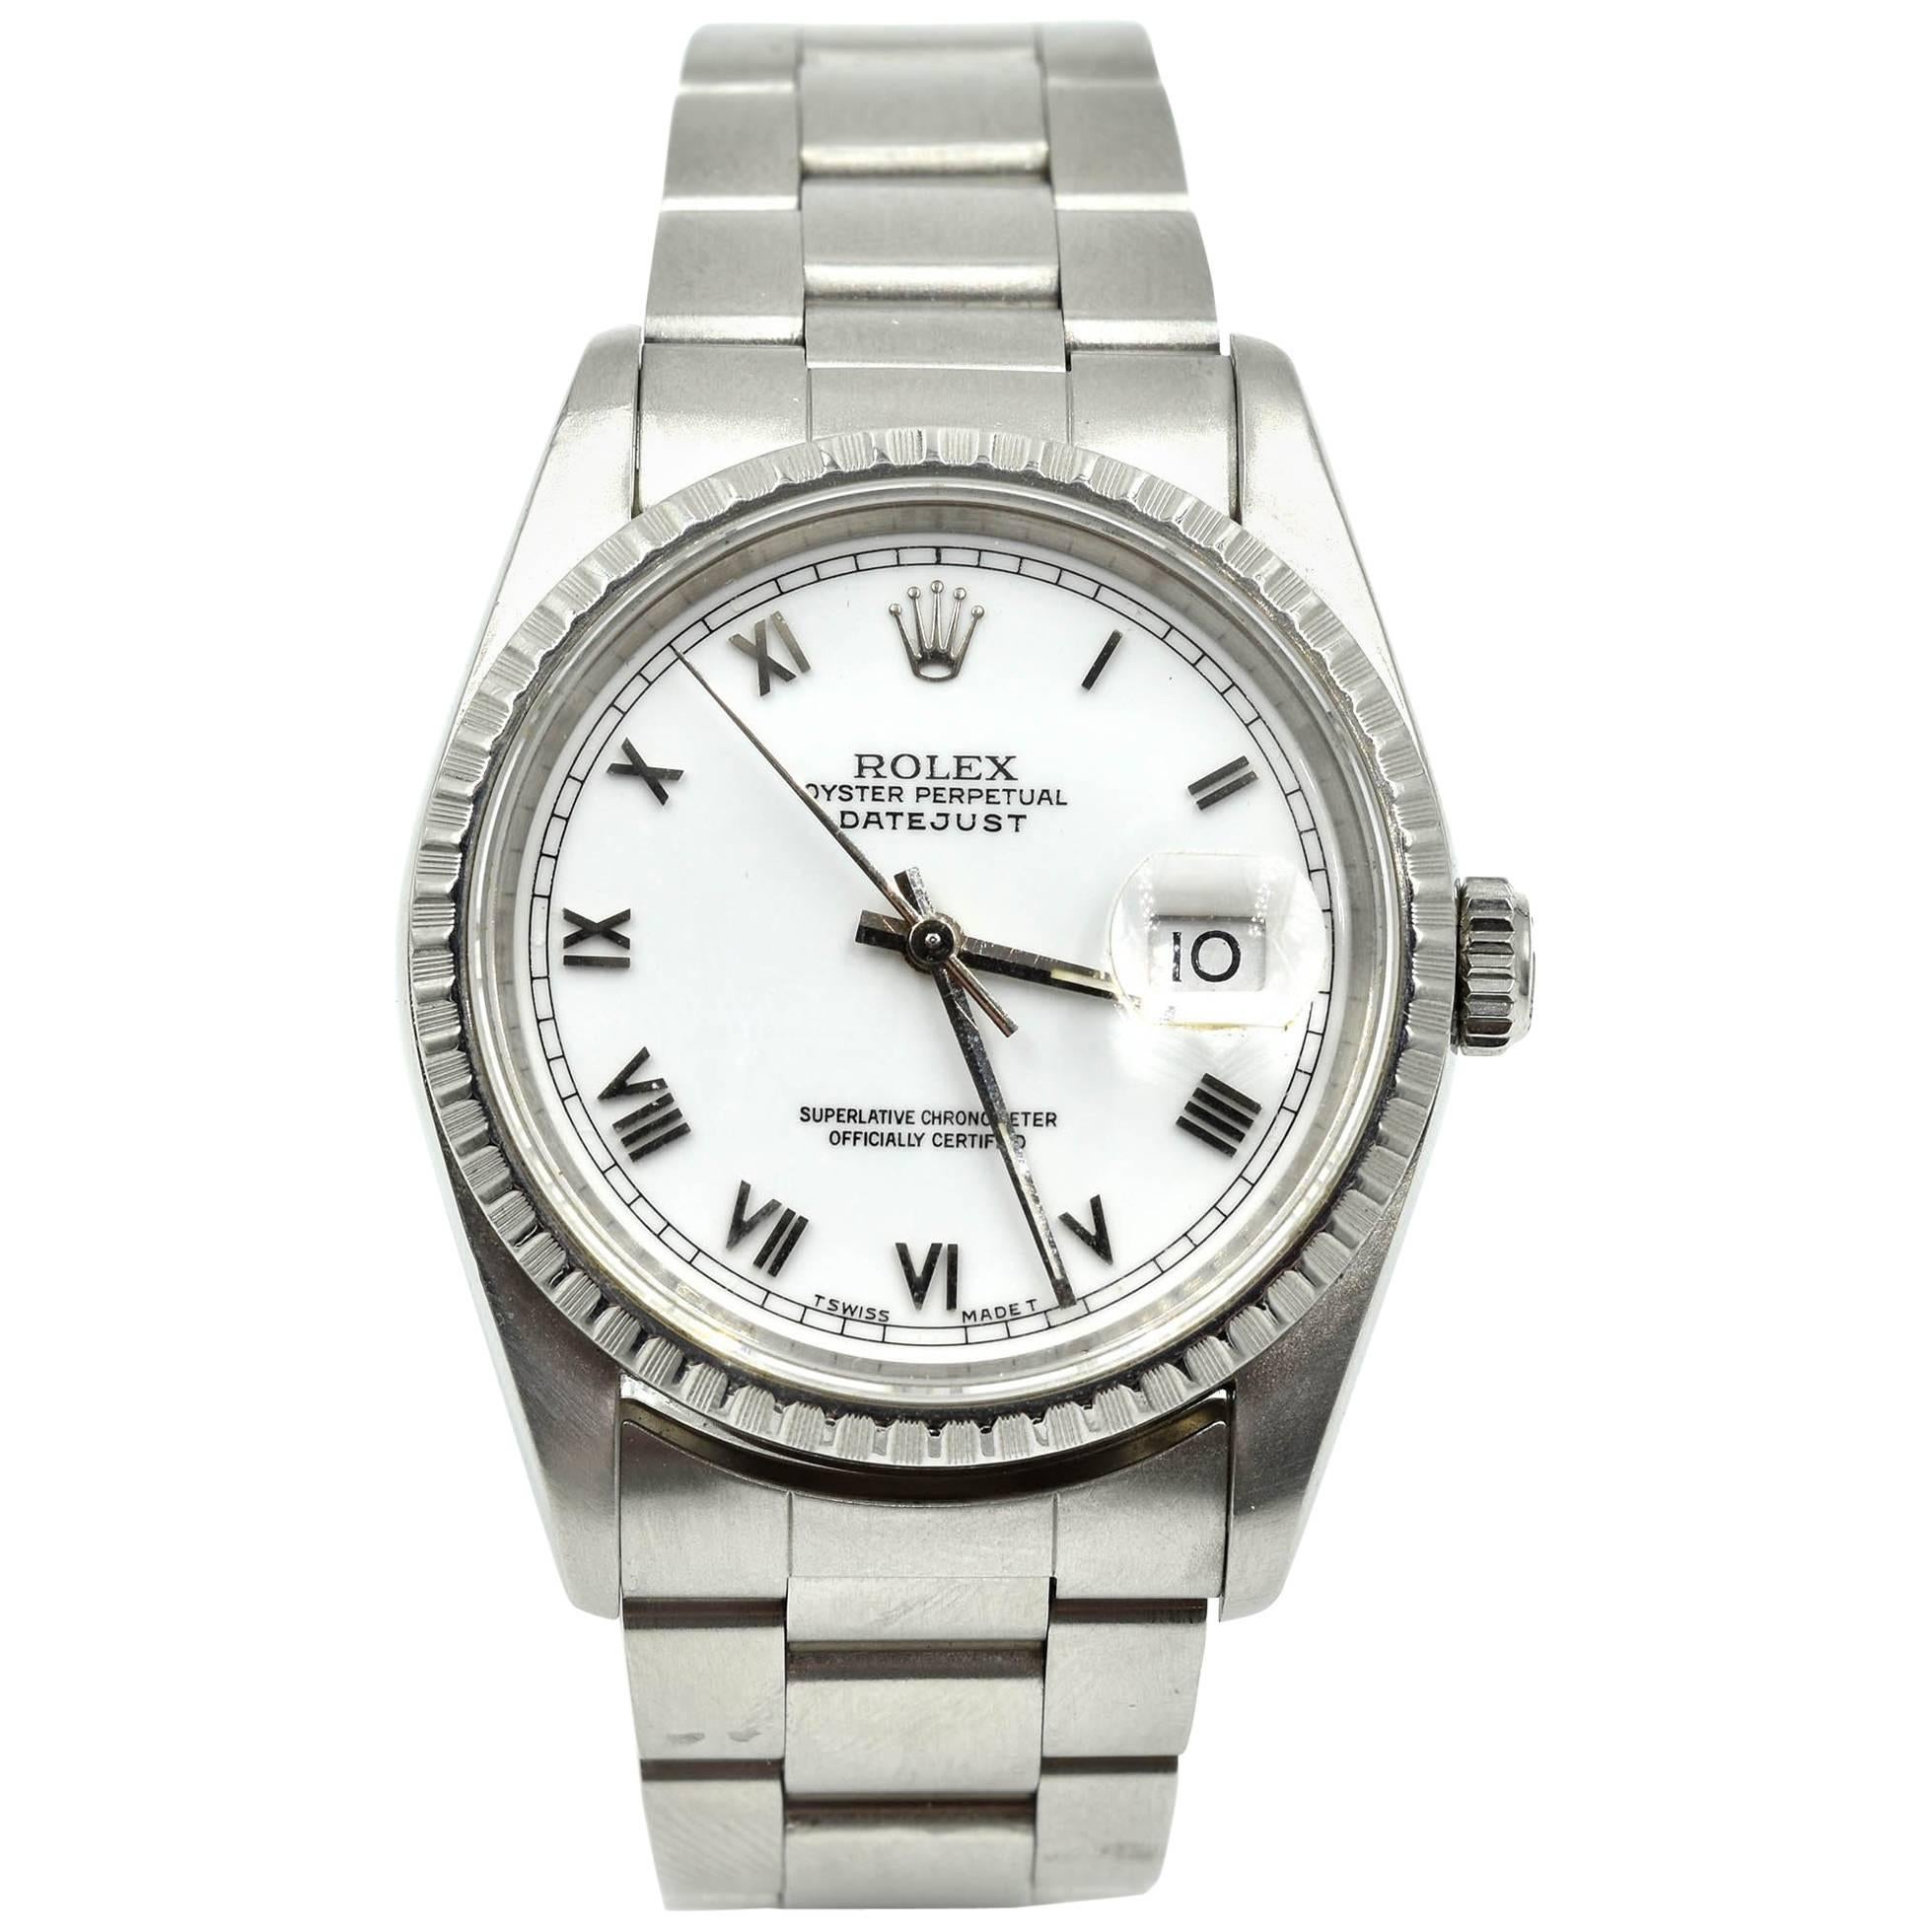 Rolex Stainless Steel Datejust White Roman Dial automatic Wristwatch Ref 16220